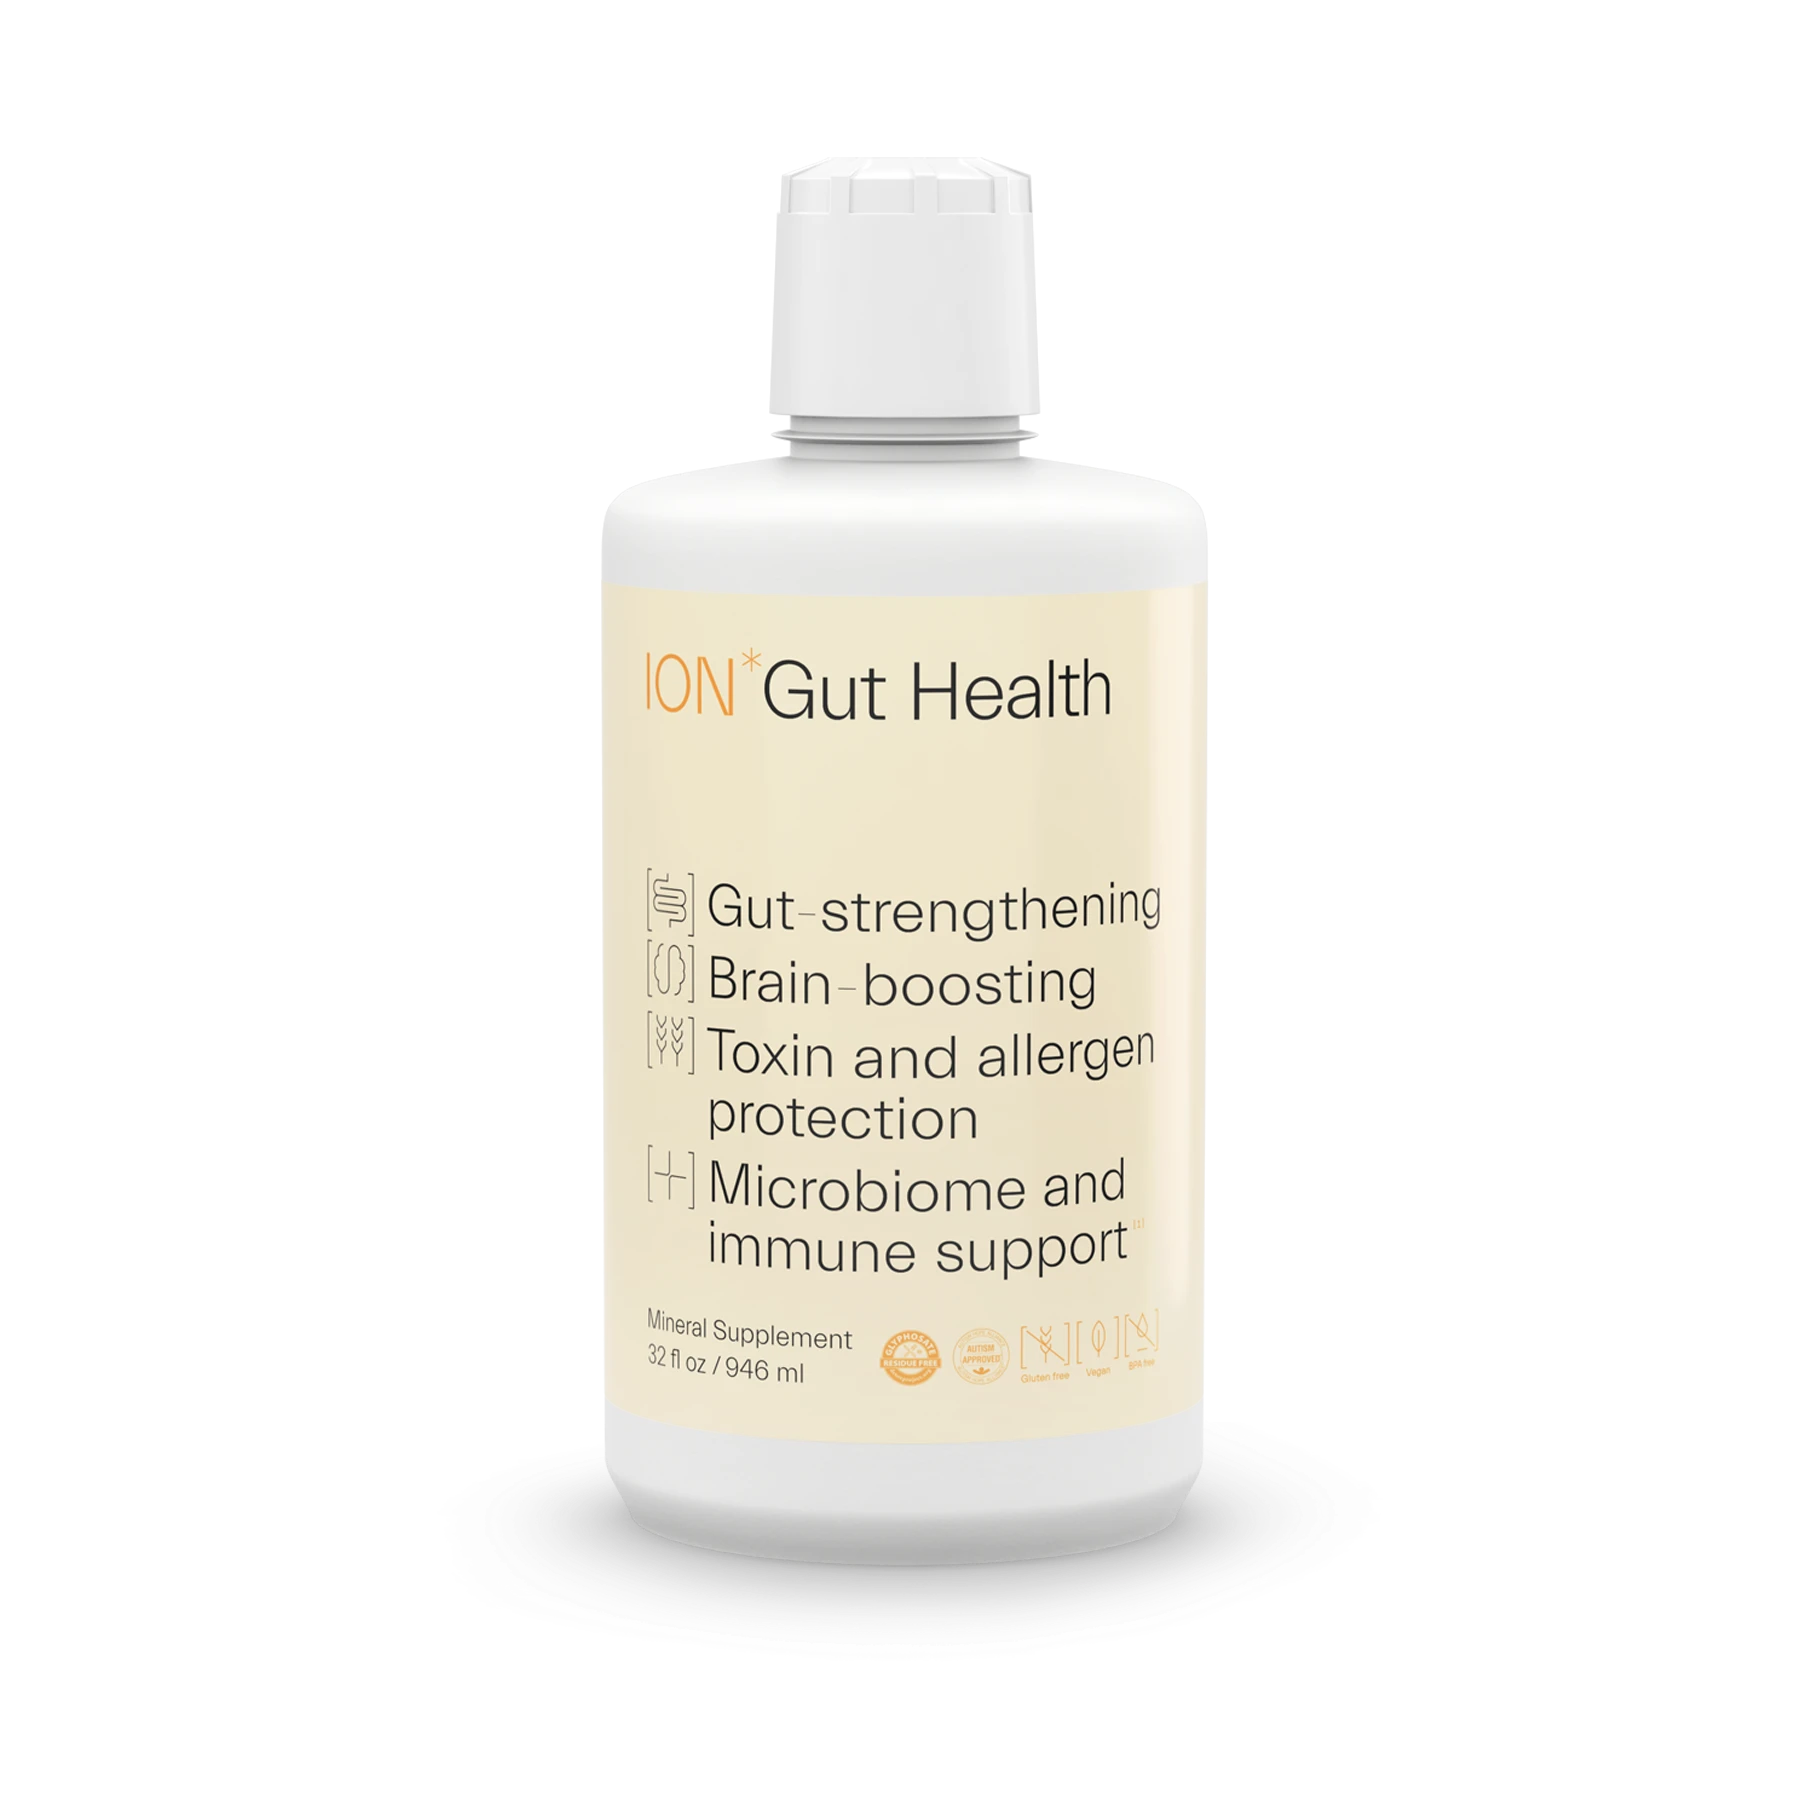 ION Gut Health • My top recommendation for gut support.